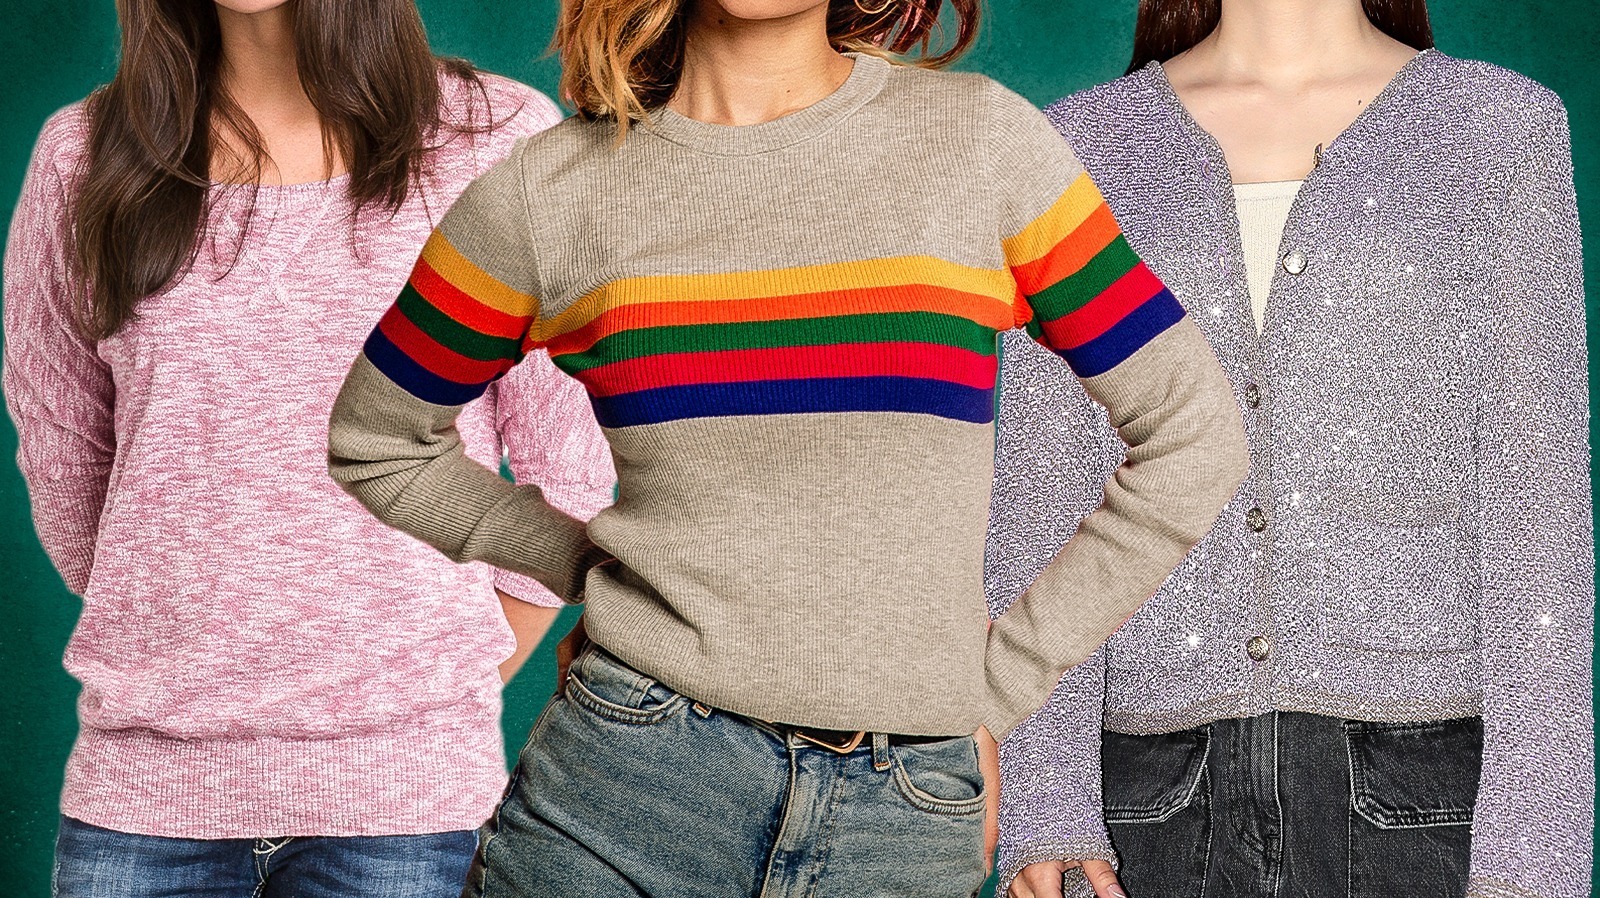 Are sweater sets in style? 4FashionAdvice